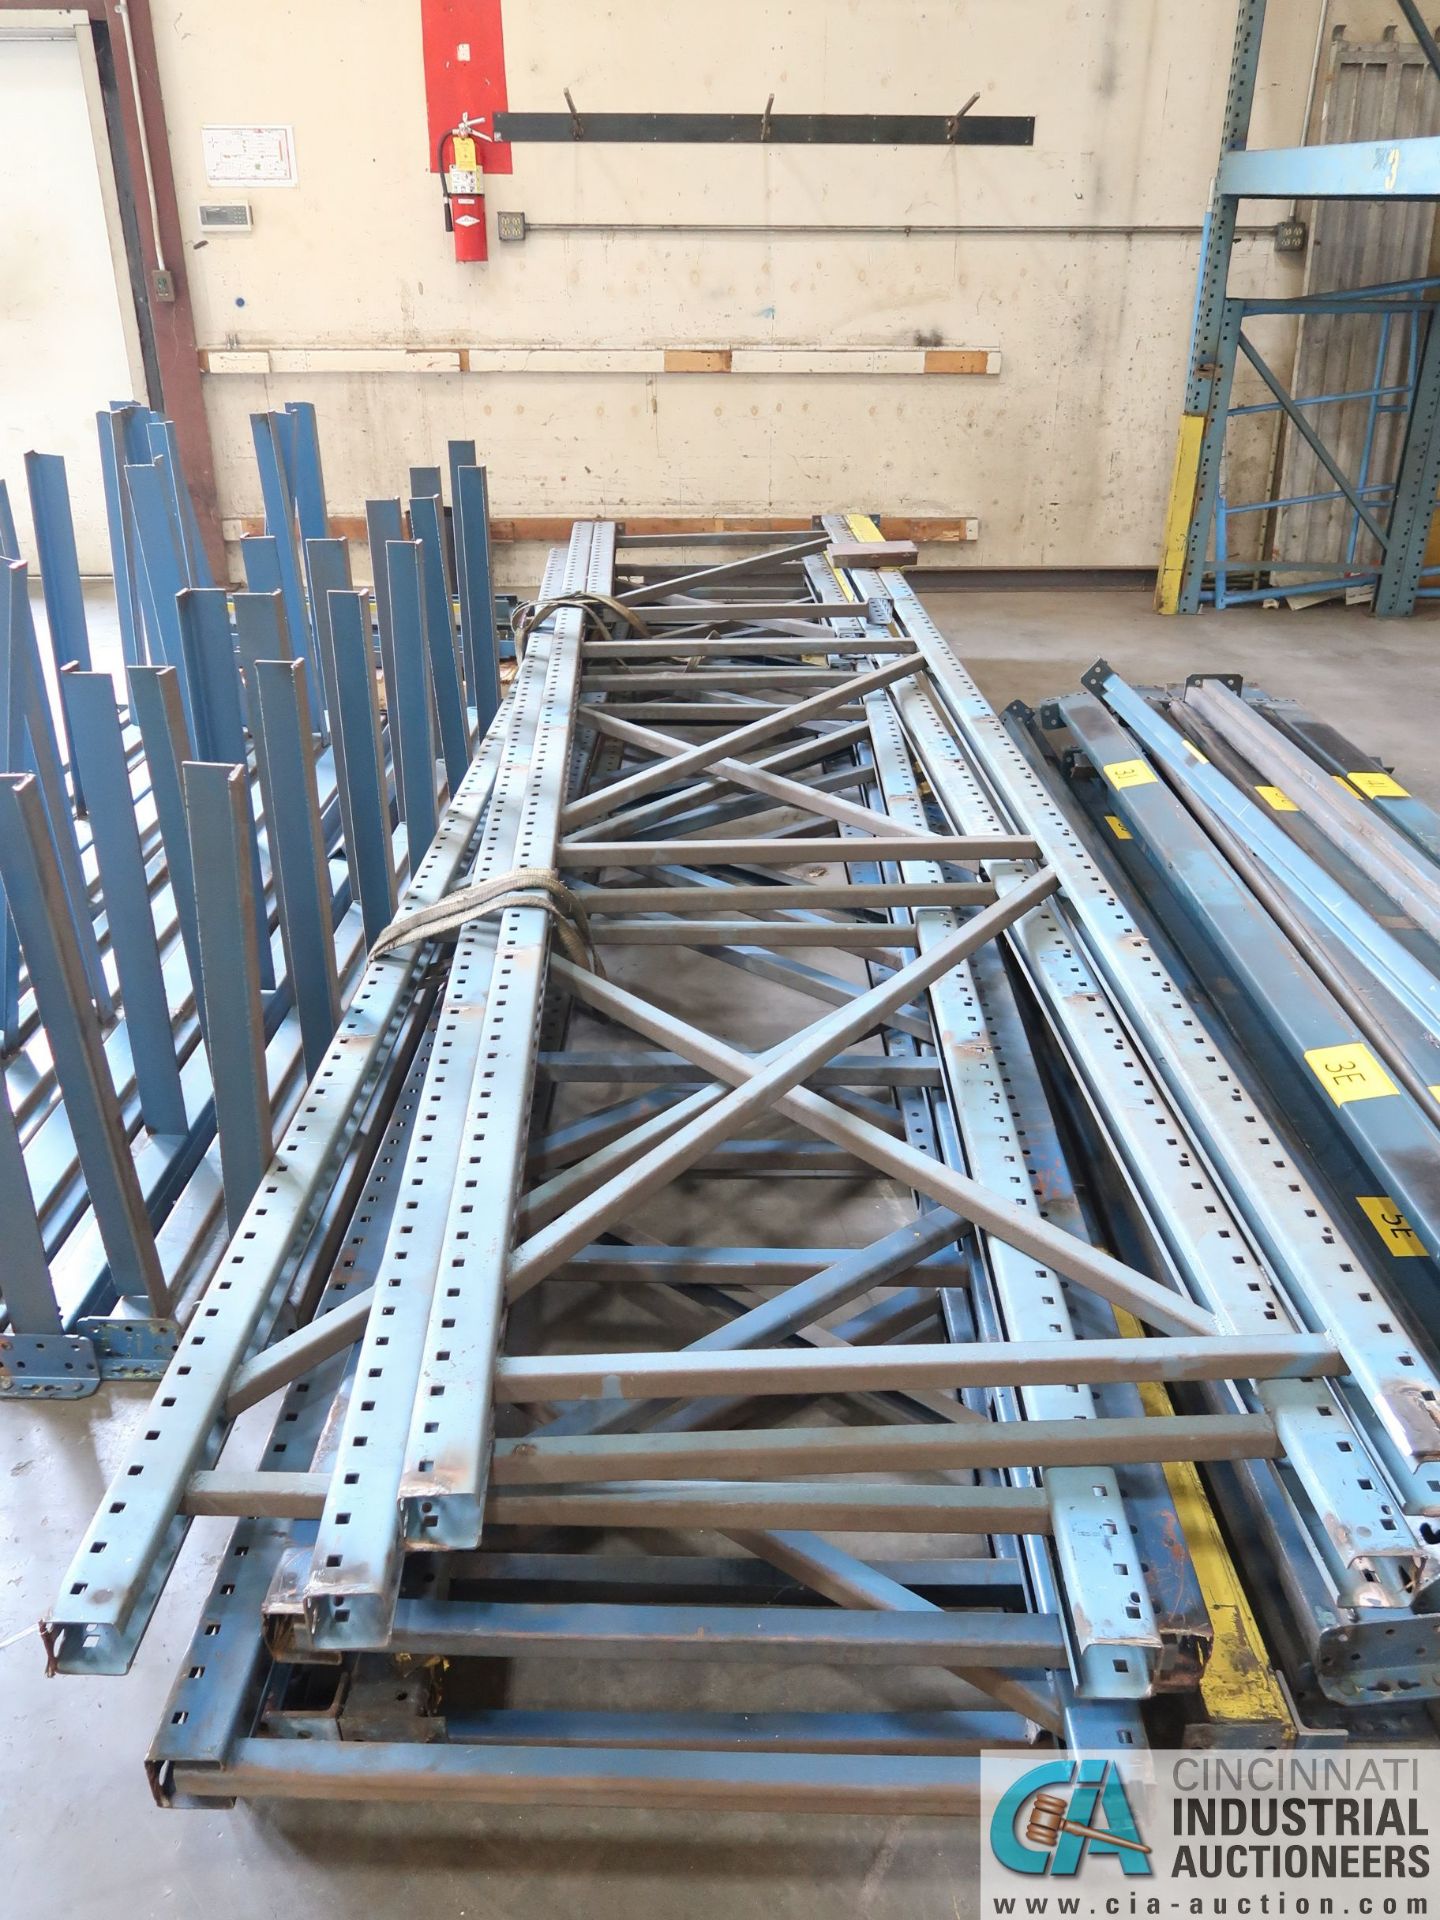 (LOT) (3) 42" X 180" AND (4) 38" X 180" UPRIGHTS, (9) 108", (6) 118", (7) 144" CROSSBEAMS ** - Image 4 of 5